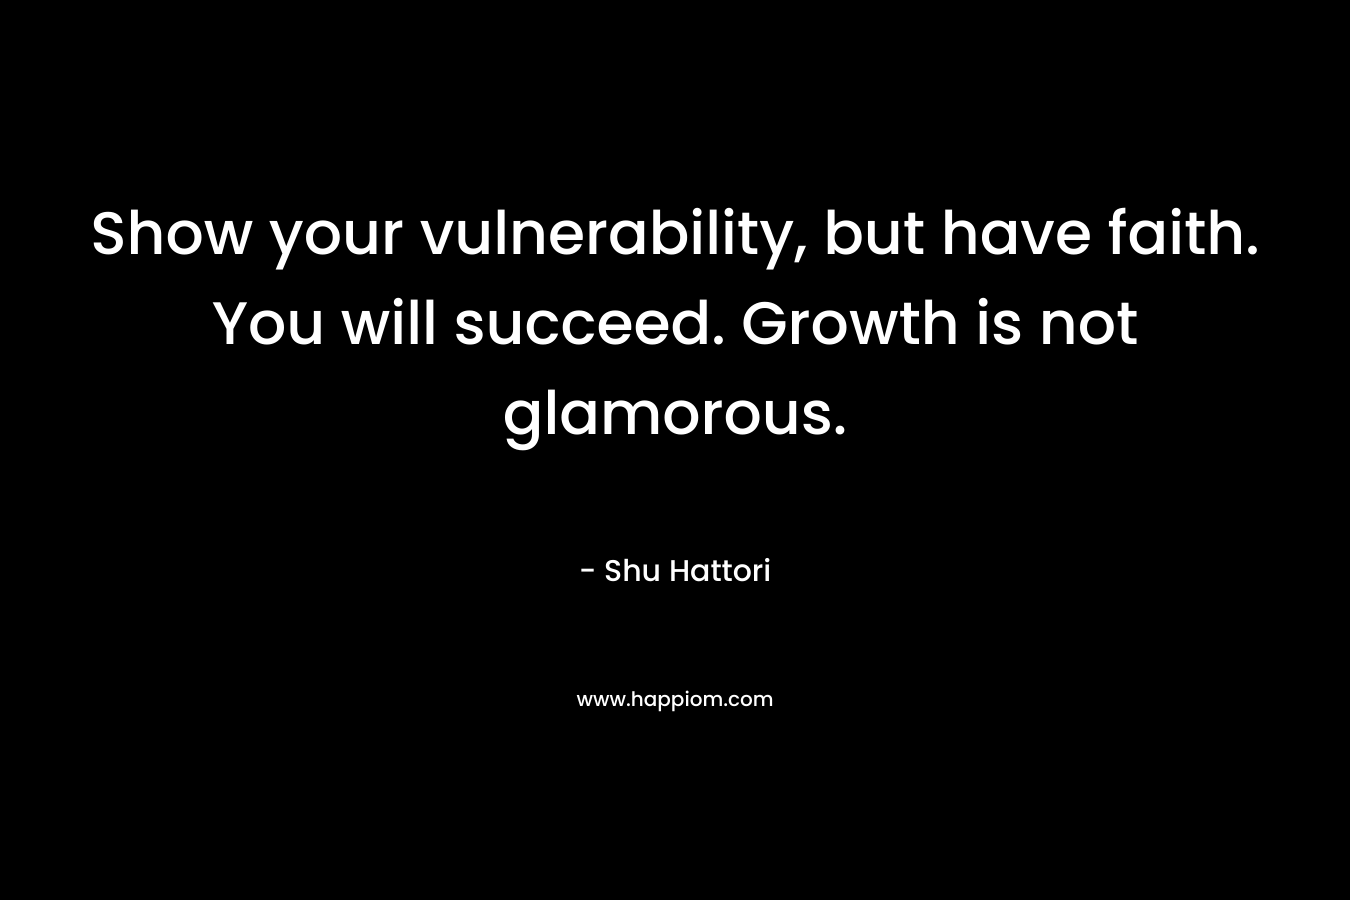 Show your vulnerability, but have faith. You will succeed. Growth is not glamorous.